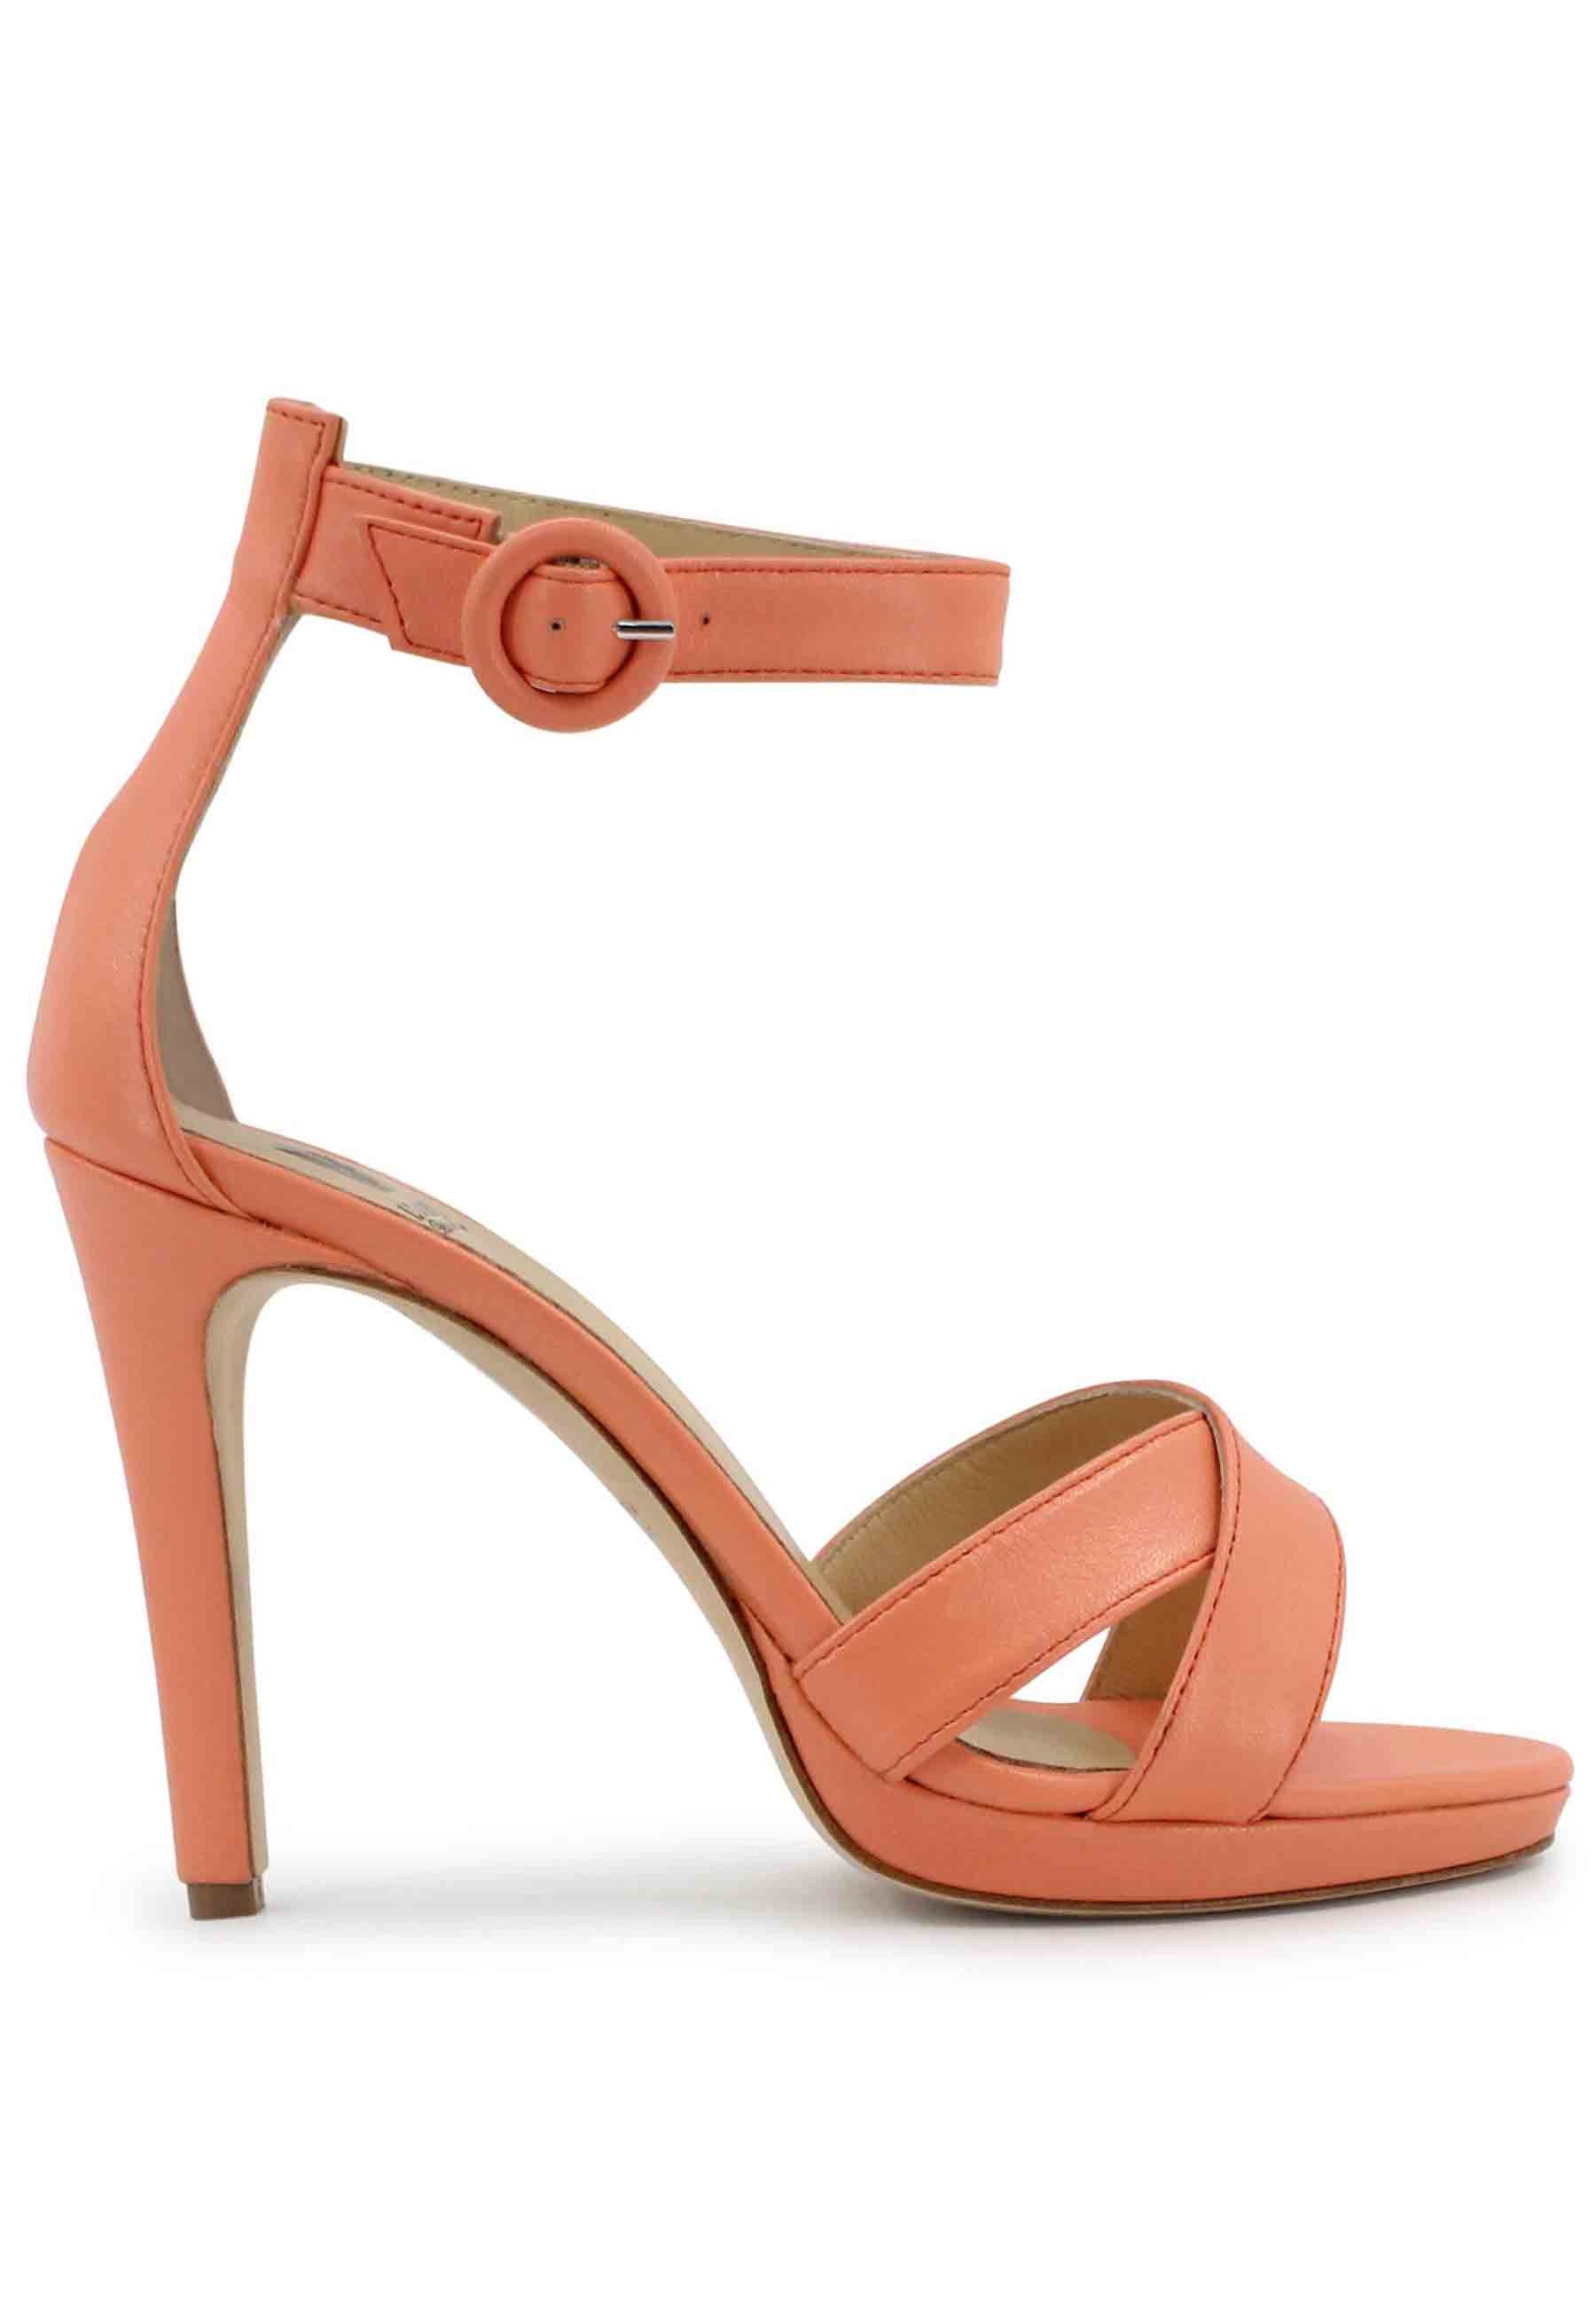 Women's salmon leather sandals with high heel and ankle strap